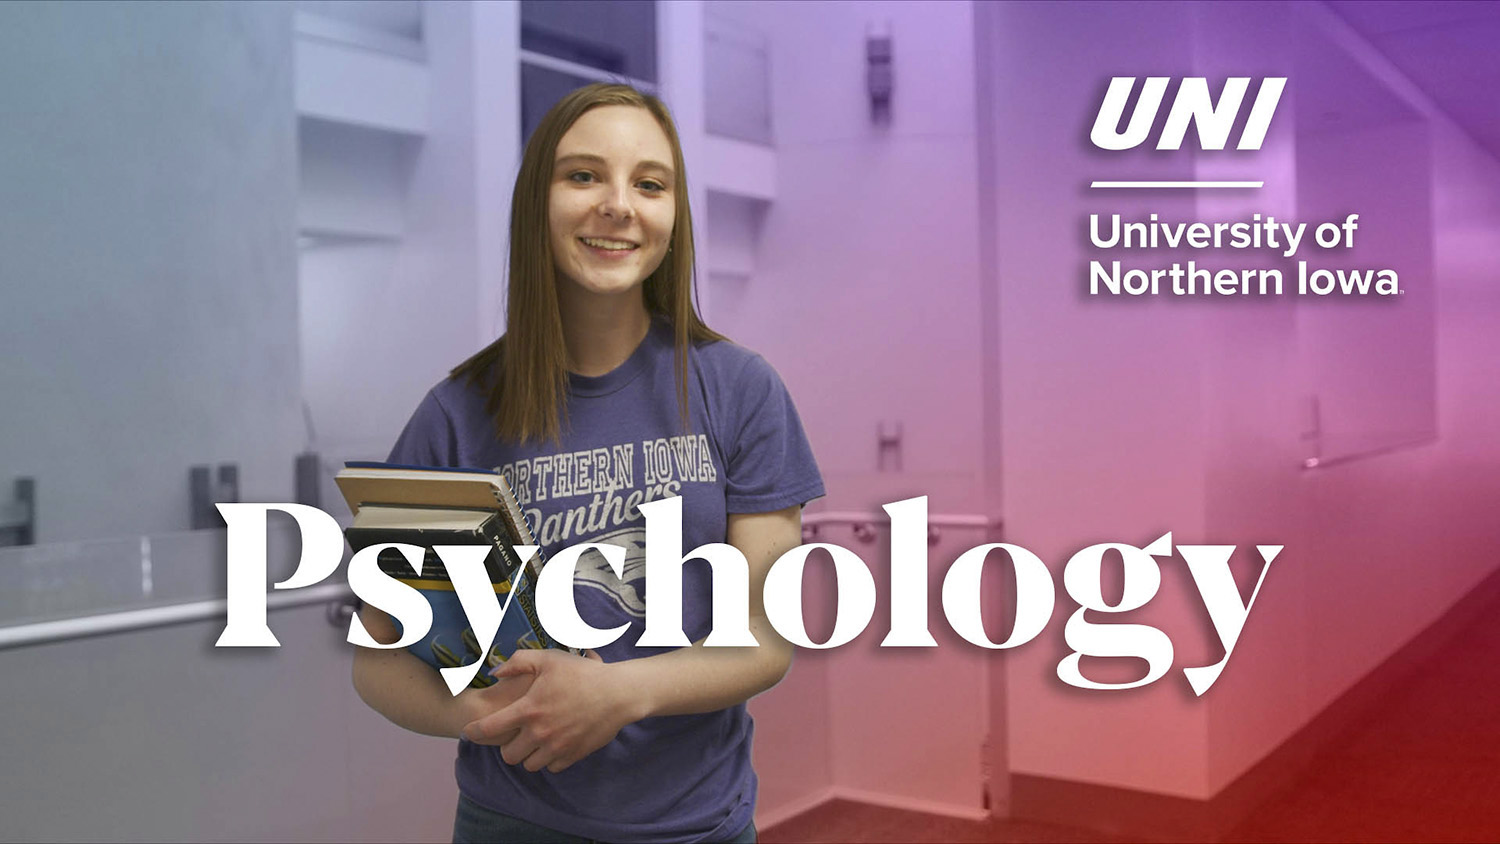 WATCH: See how a psychology major at UNI can put you on the path to helping others